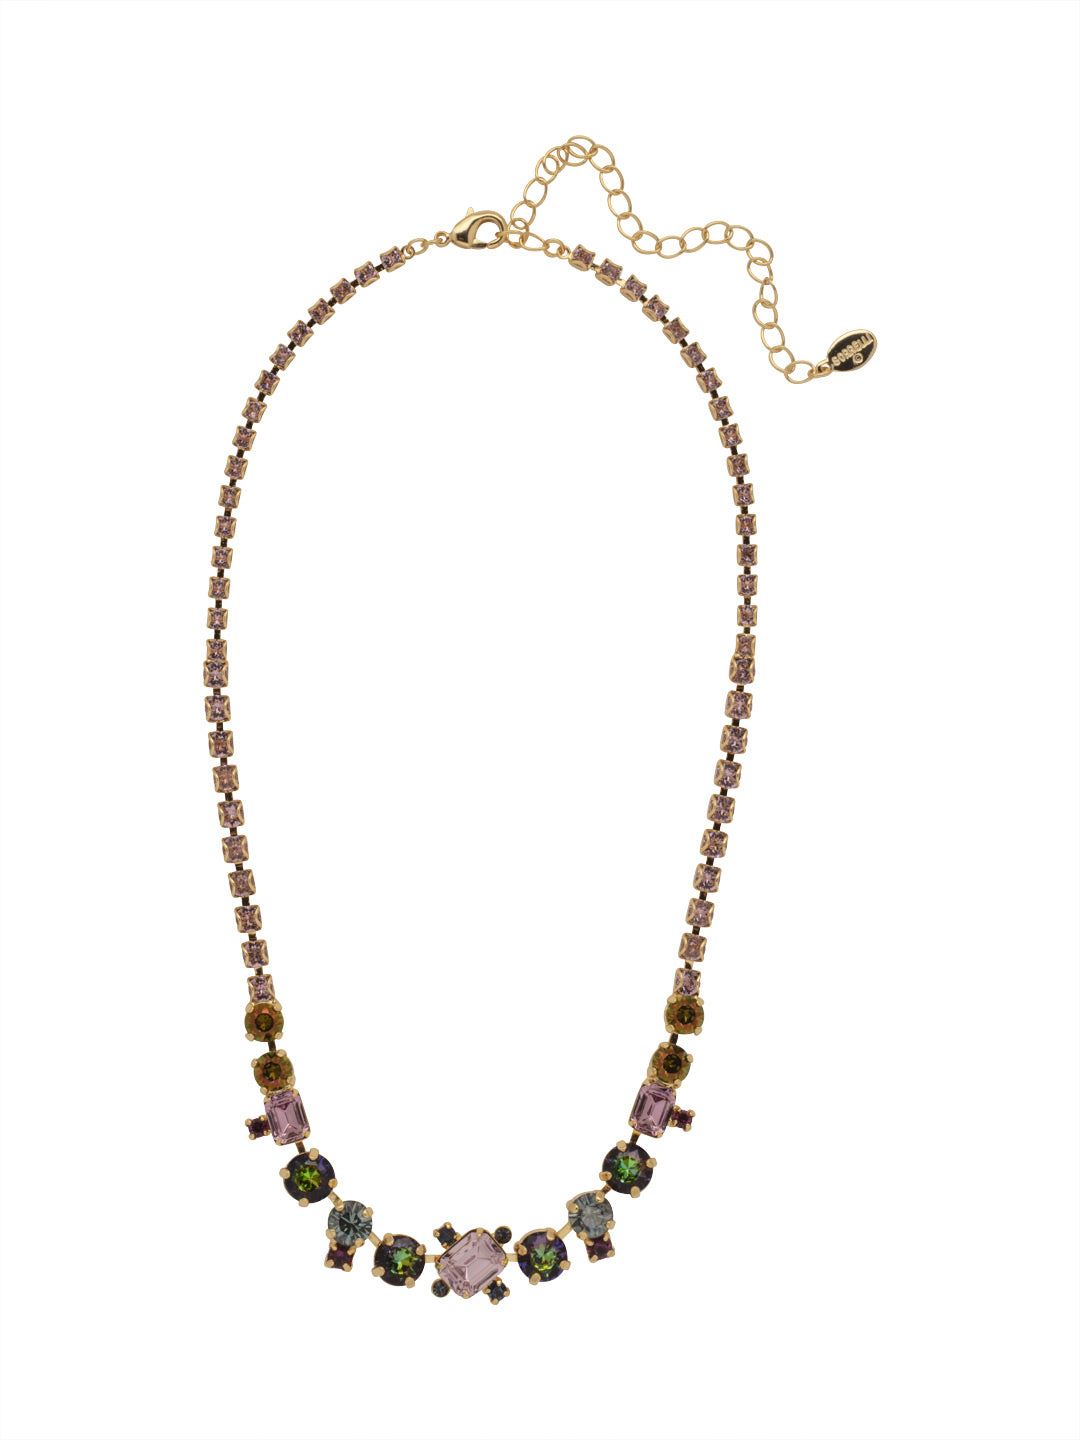 Tinsley Tennis Necklace - NEN17BGROP - <p>The Tinsley Statement Necklace exudes drama. Every inch is encrusted in sparkling crystals competing to be noticed. Fasten it on when you're looking for some attention. From Sorrelli's Royal Plum collection in our Bright Gold-tone finish.</p>